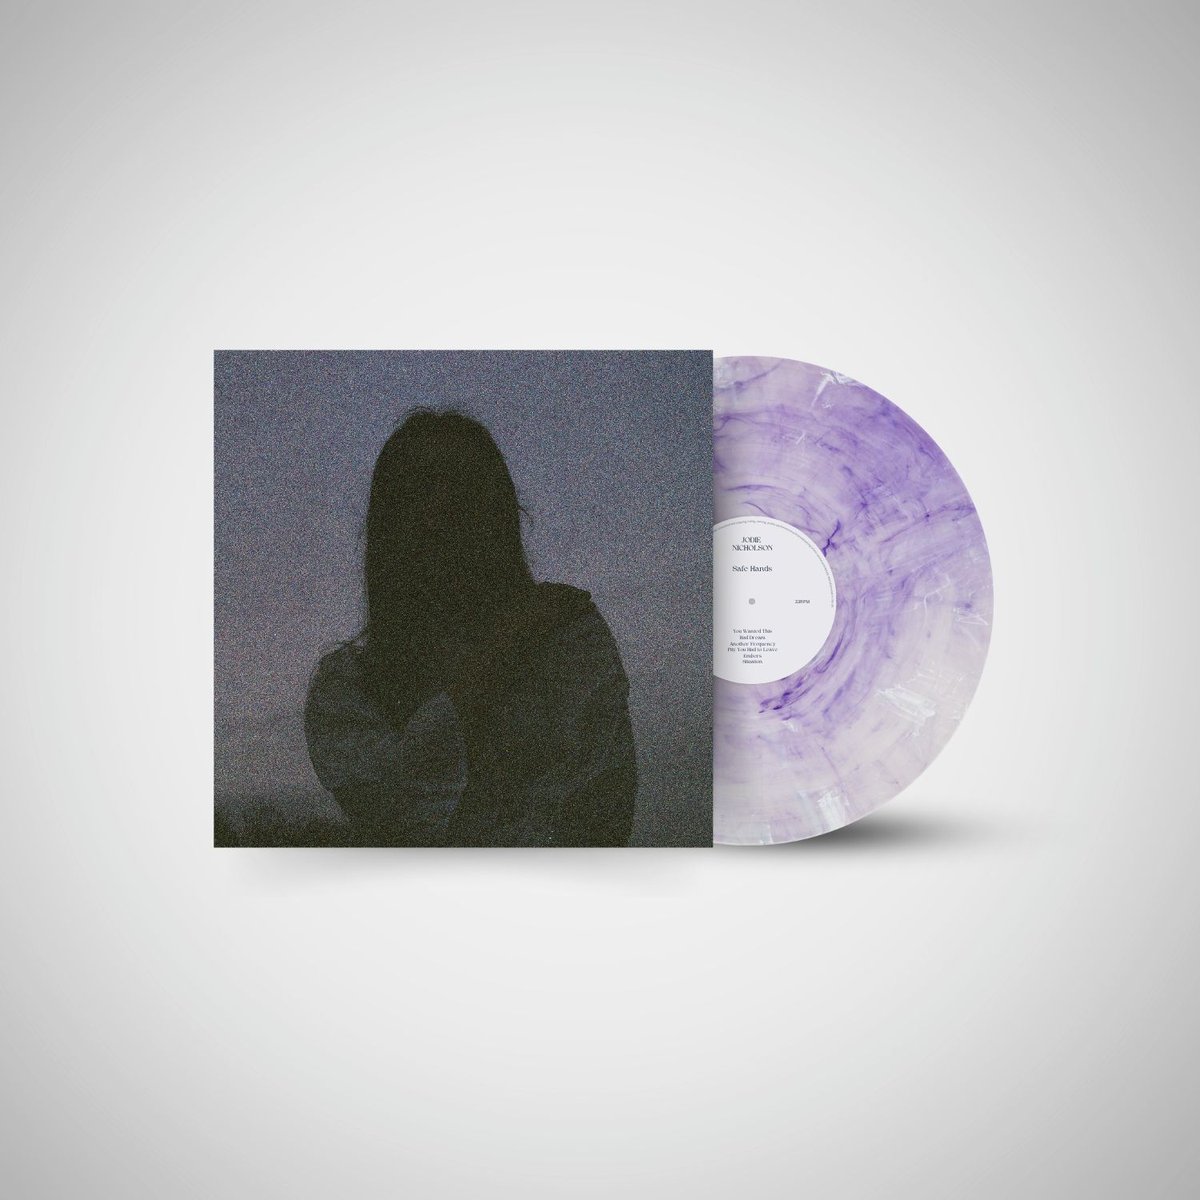 There's still time to sign up to The Friday Dispatch, Best Fit's weekly newsletter, for a chance to win a vinyl of Safe Hands by Jodie Nicholson (@jodienic_music). We have 3 to give away! buff.ly/3R4Ojsk